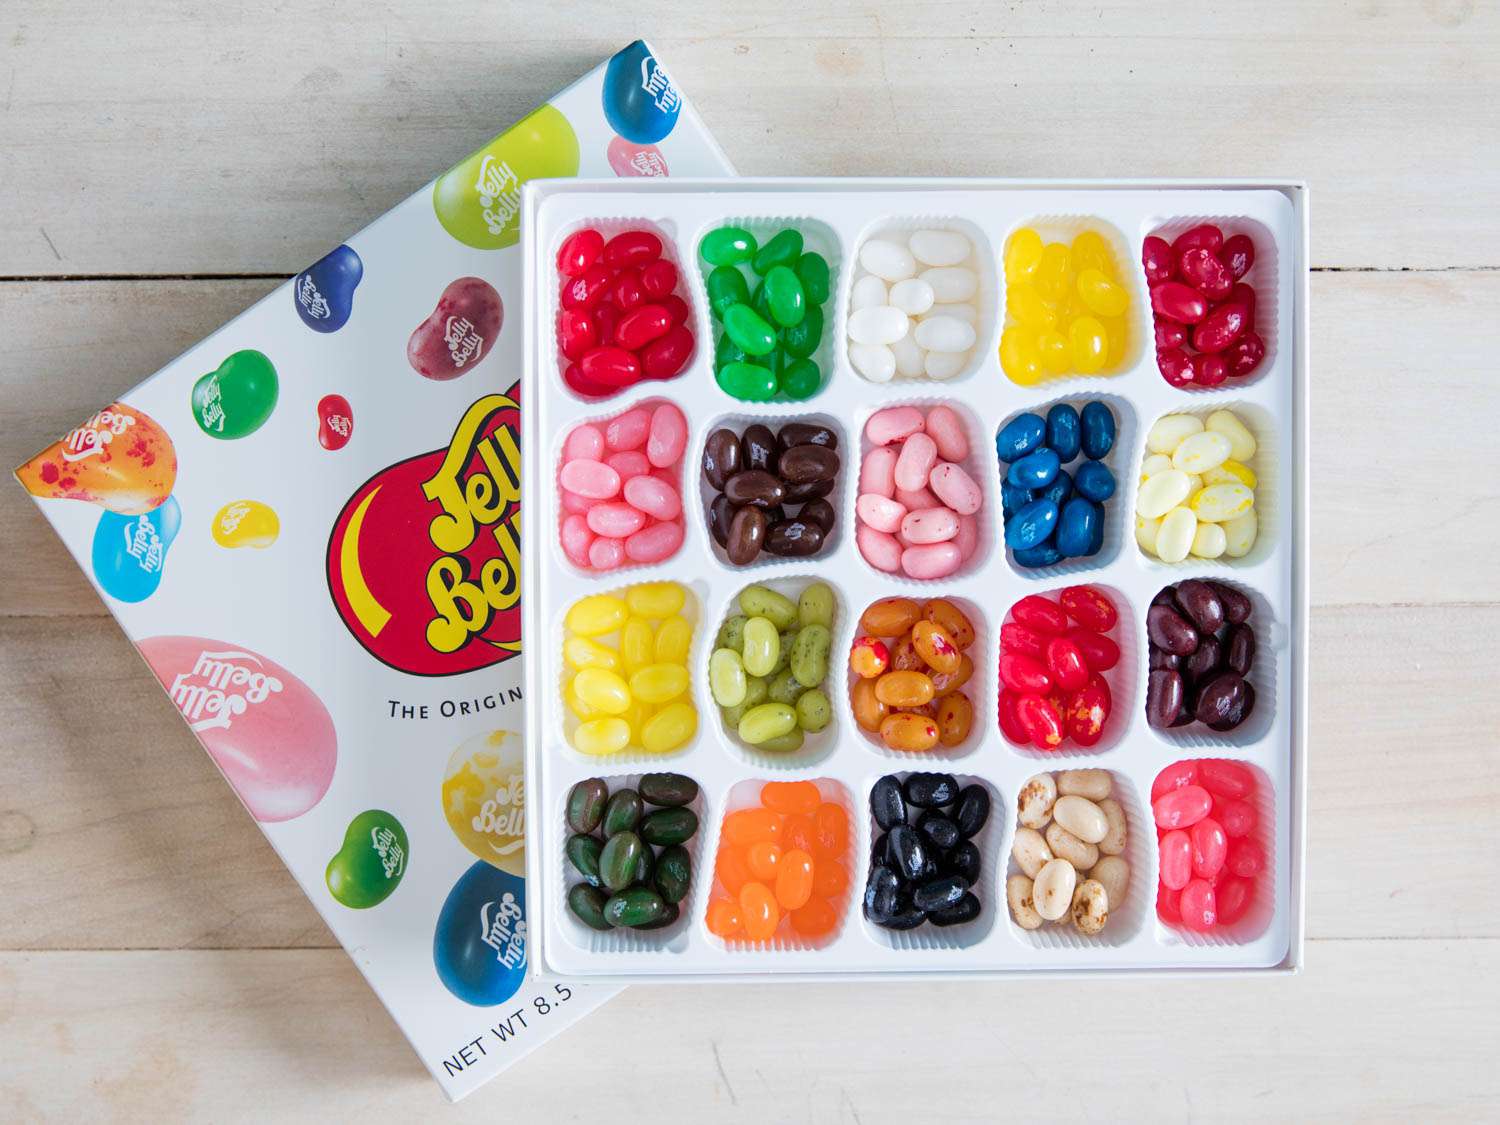 A box of assorted Jelly Belly jellybeans.